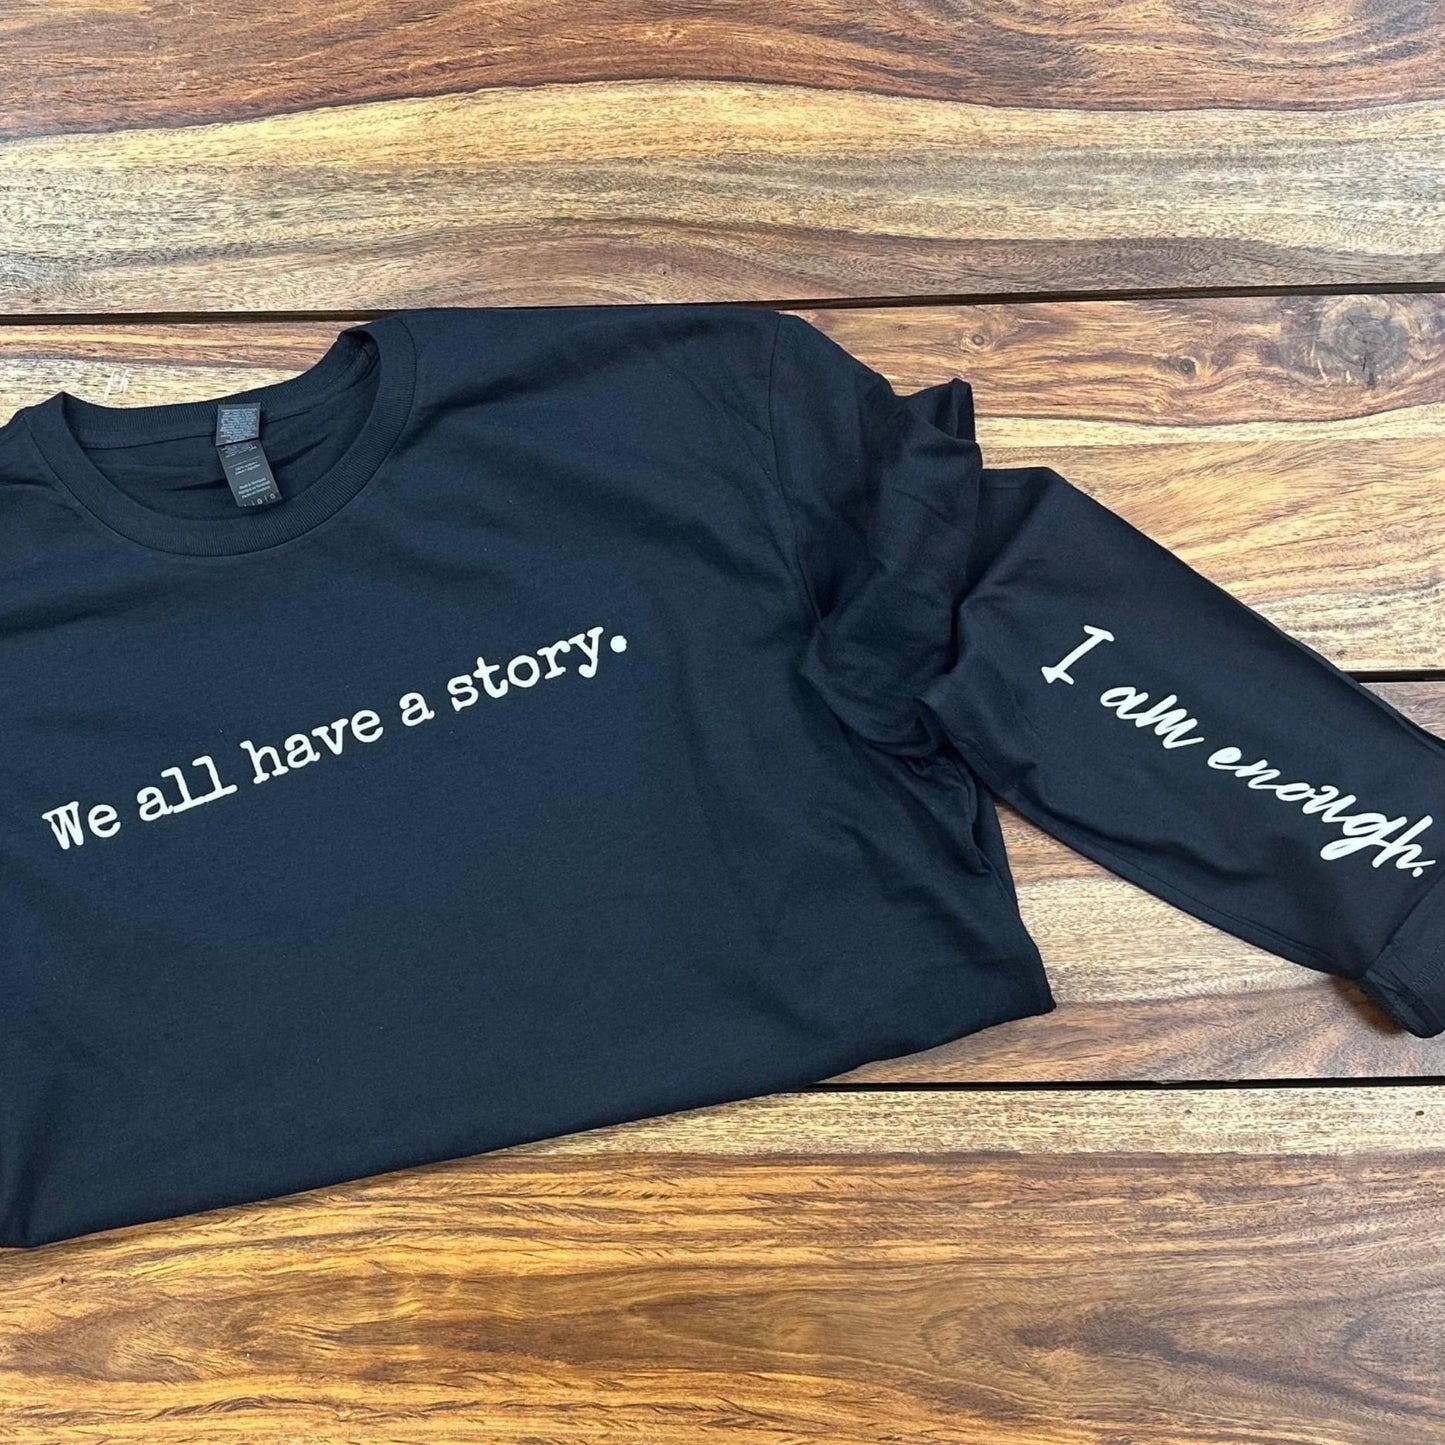 Black long sleeve cotton tee.  "We all have a story." is printed across the chest in white ink.  On the left sleeve, printed in cursive font is "I am enough".  Proceeds from the sale of this tee support Call to Freedom, supporting victims of human trafficking.